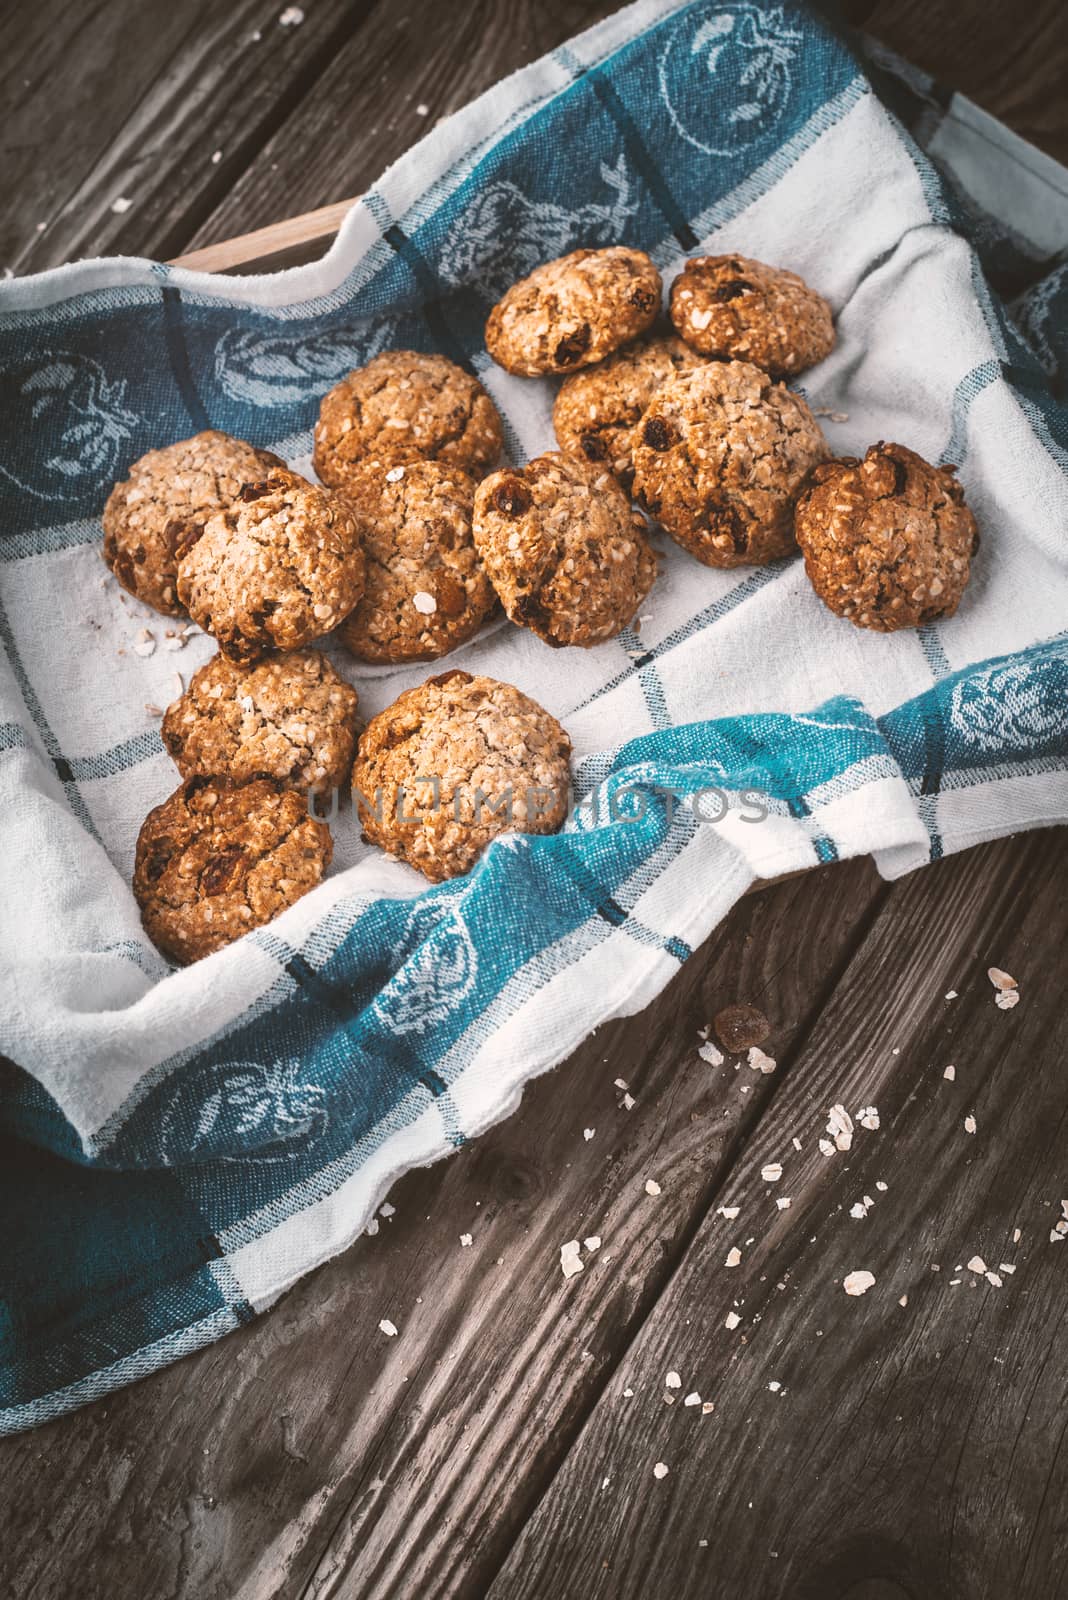 Oatmeal cookies with raisins in a box vertical